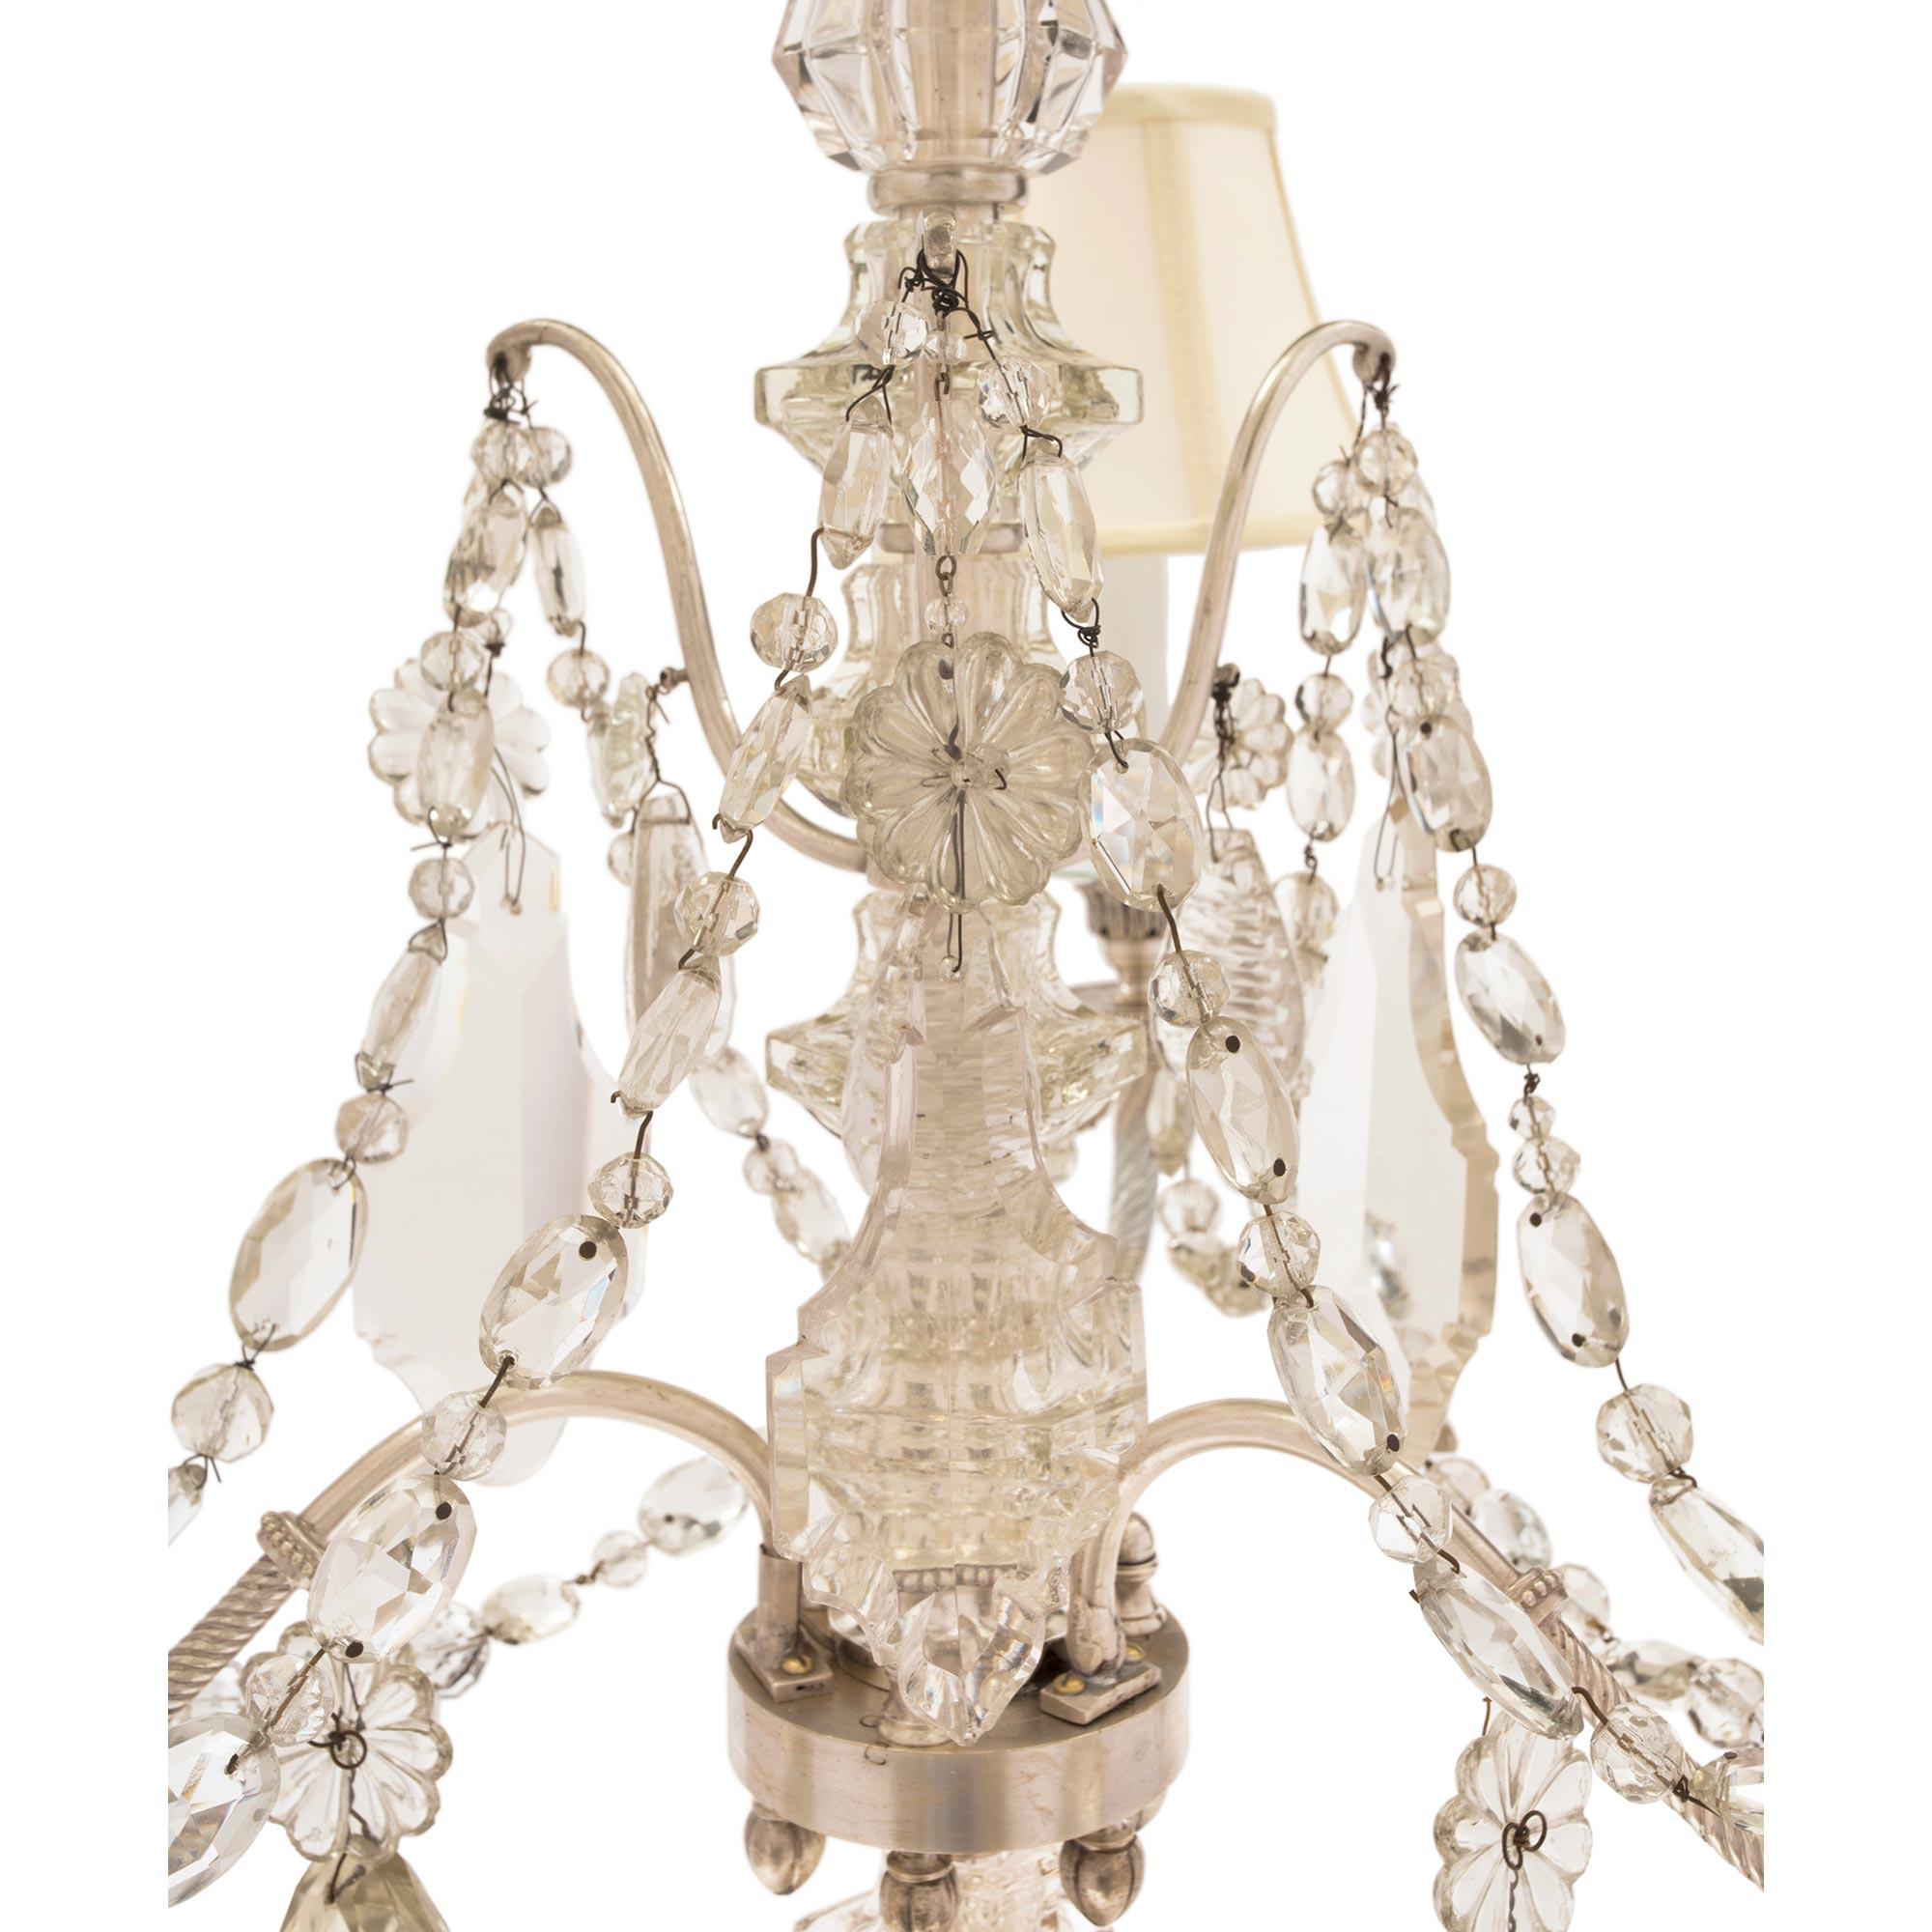 French Mid-19th Century Louis XVI Style Baccarat Crystal and Bronze Chandelier For Sale 2